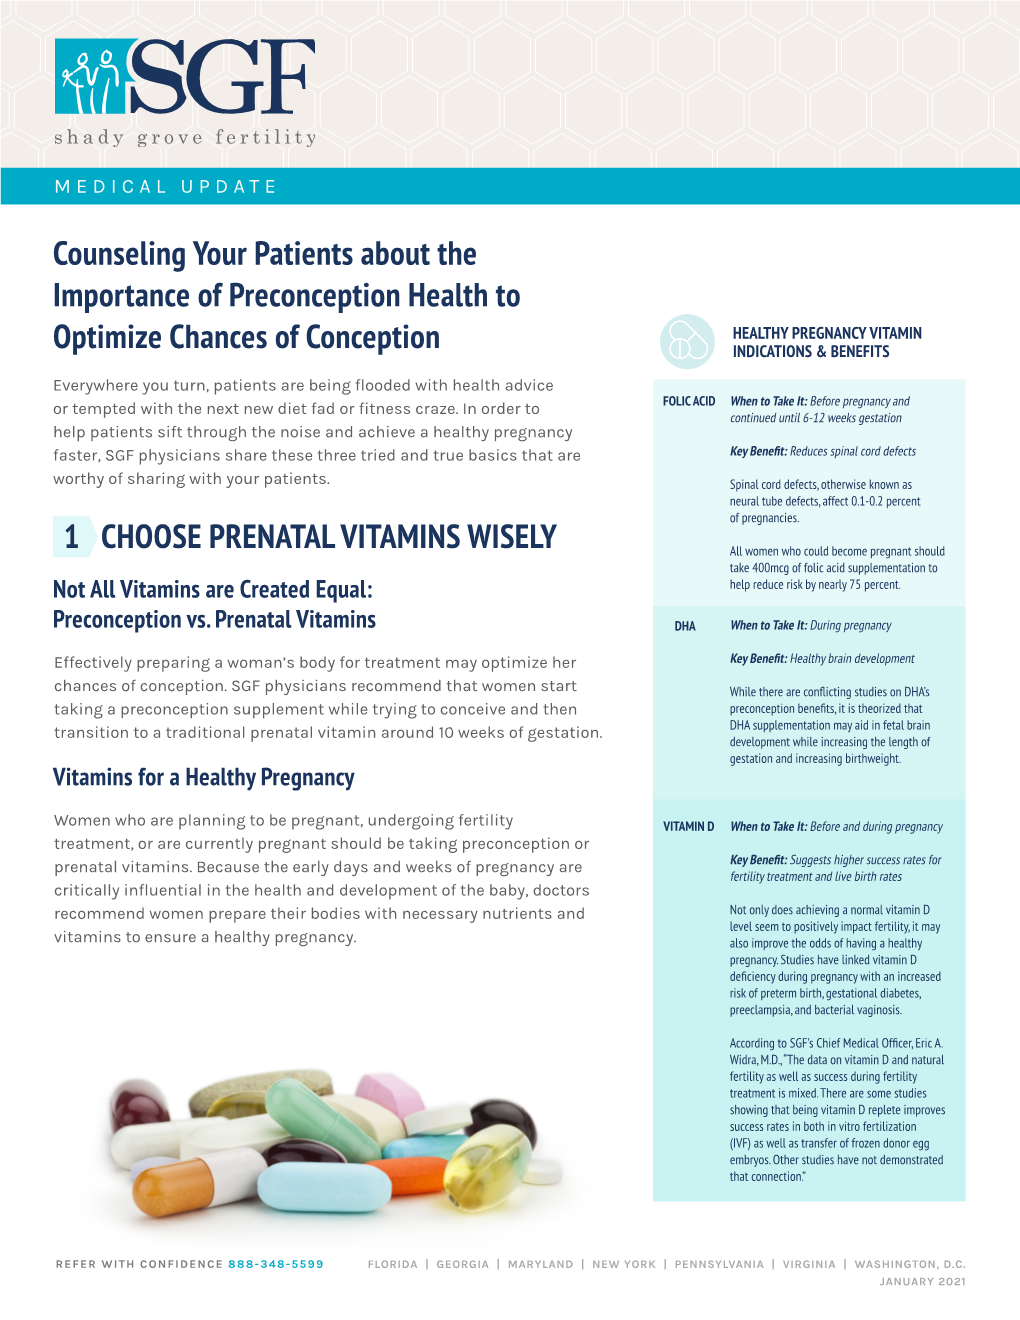 Counseling Your Patients About the Importance of Preconception Health